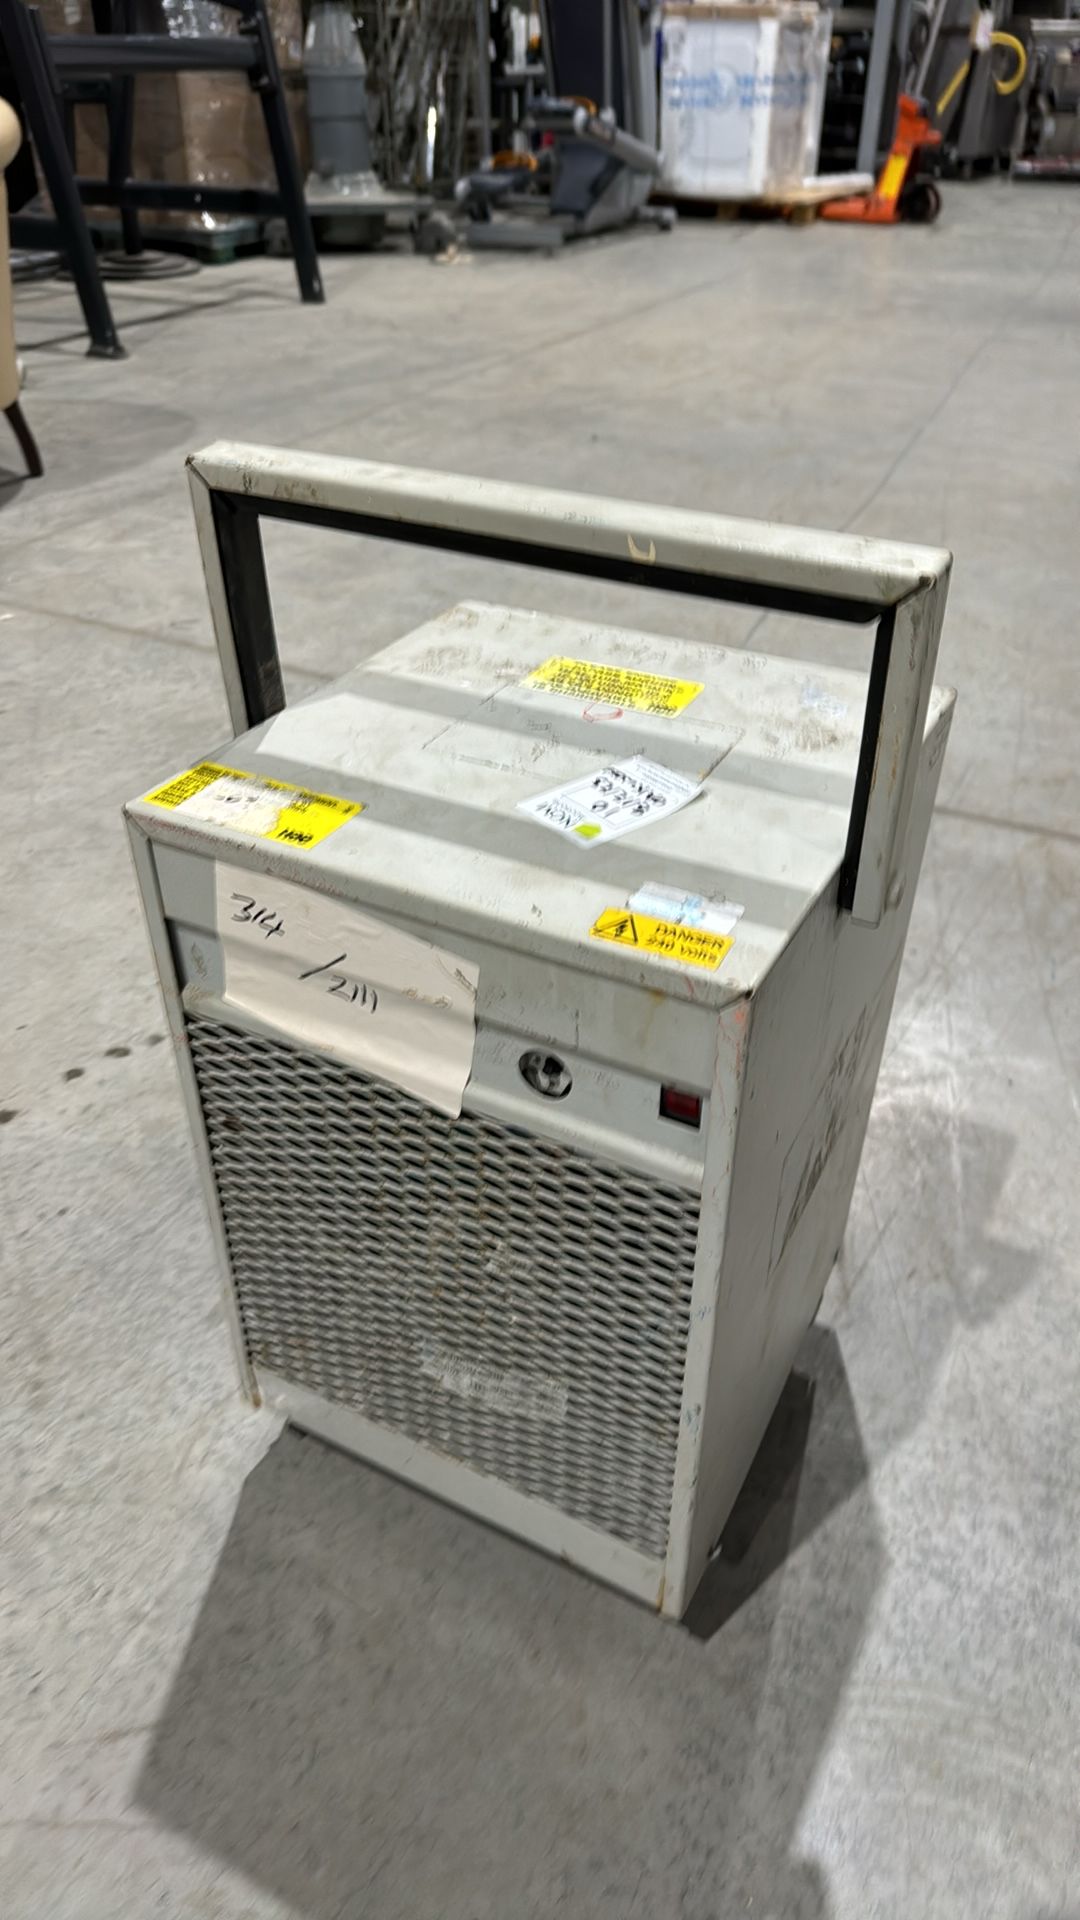 EIP Mobile Dehumidifier on Wheels - Image 3 of 4